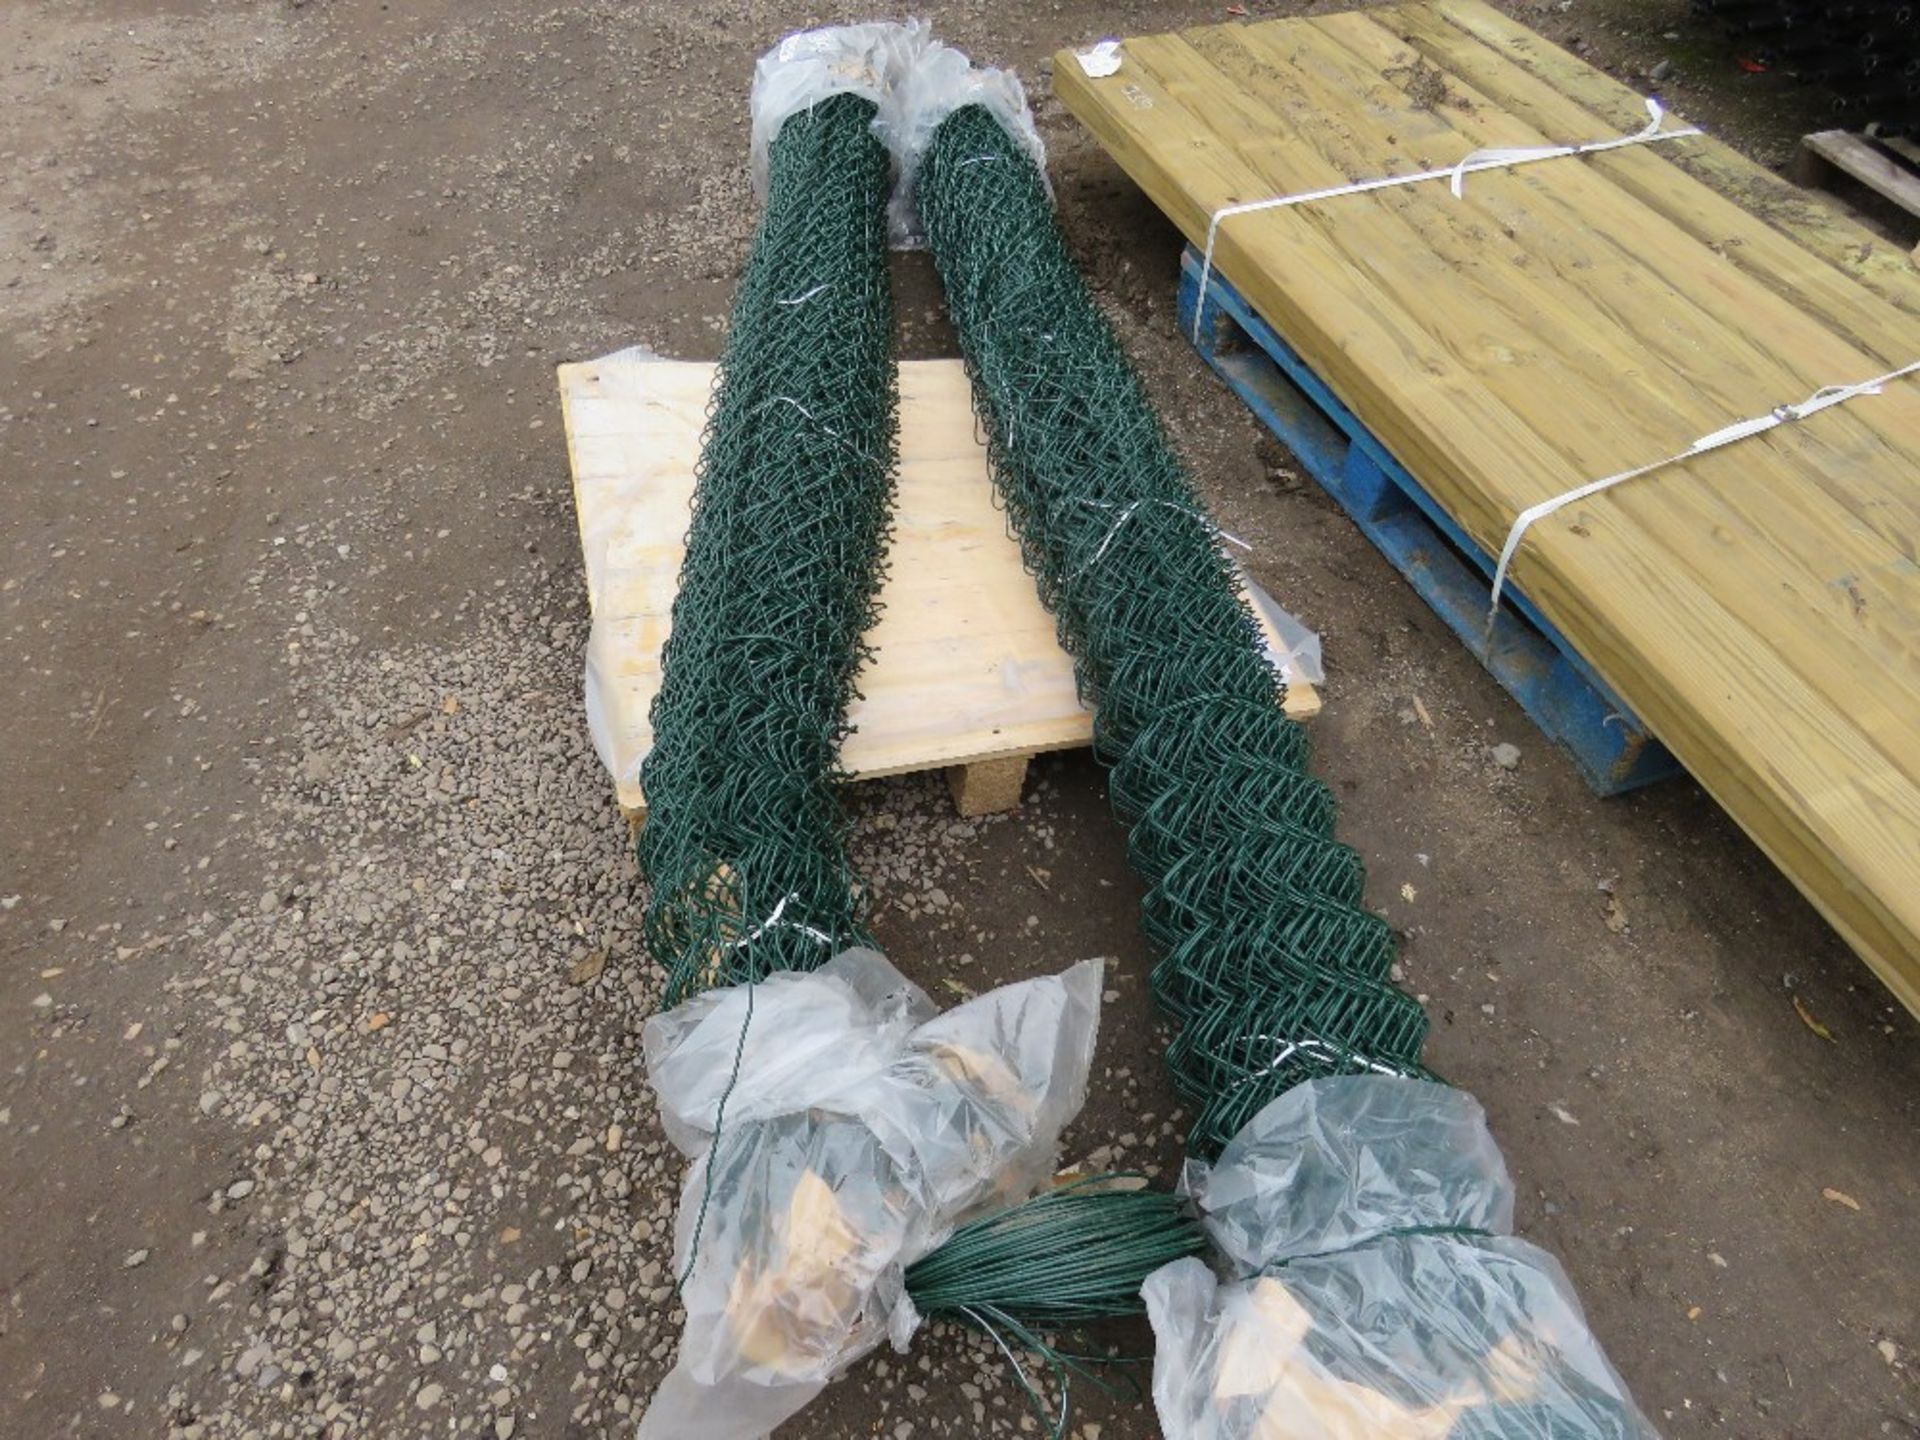 2 X ROLLS OF GREEN CHAINLINK FENCING 2.2M HEIGHT APPROX. - Image 2 of 2